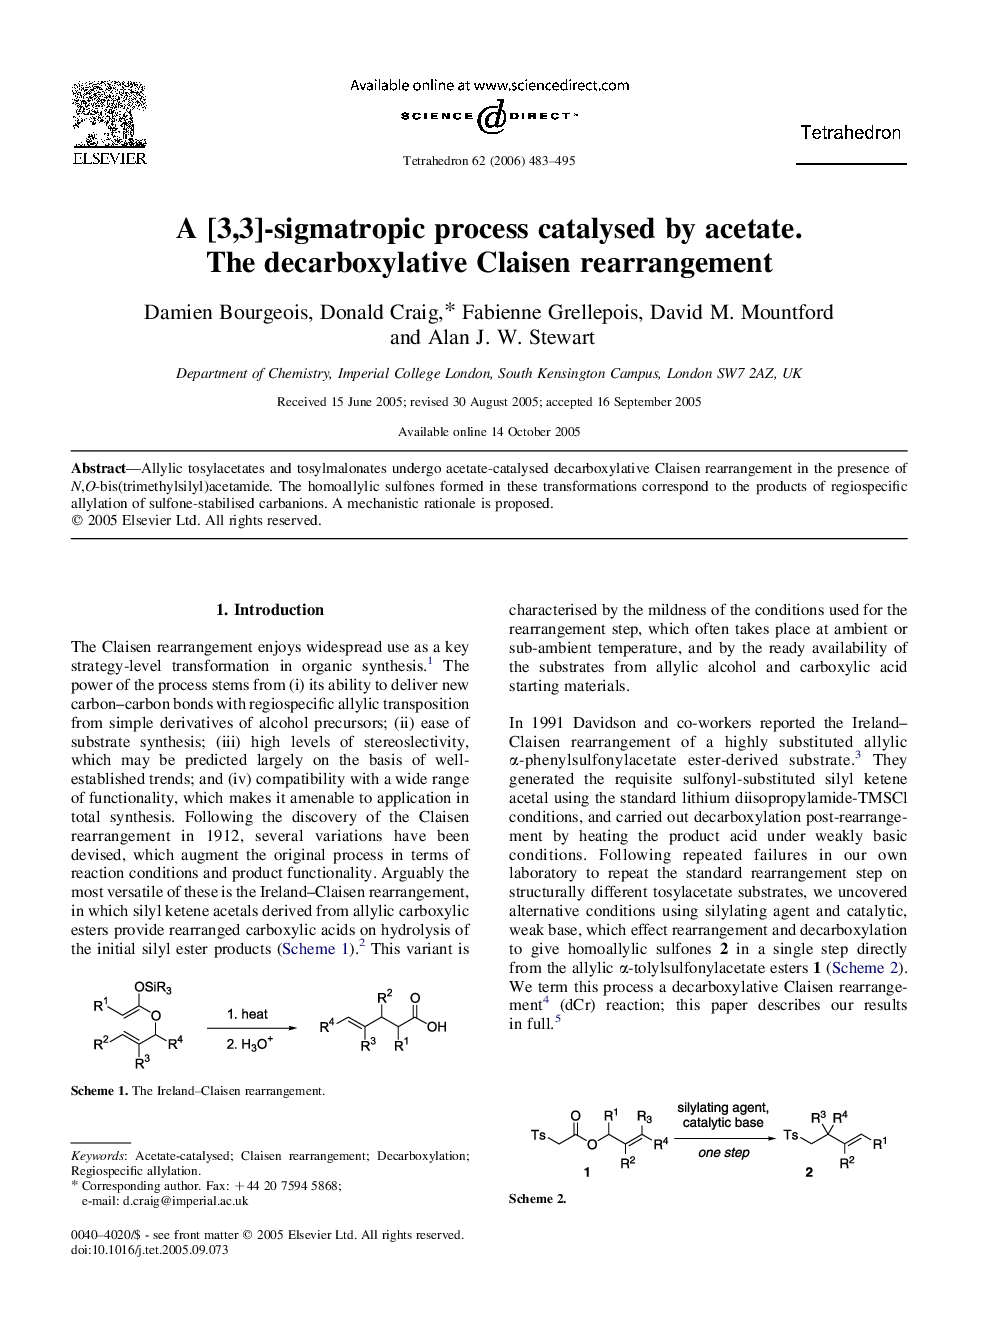 A [3,3]-sigmatropic process catalysed by acetate. The decarboxylative Claisen rearrangement